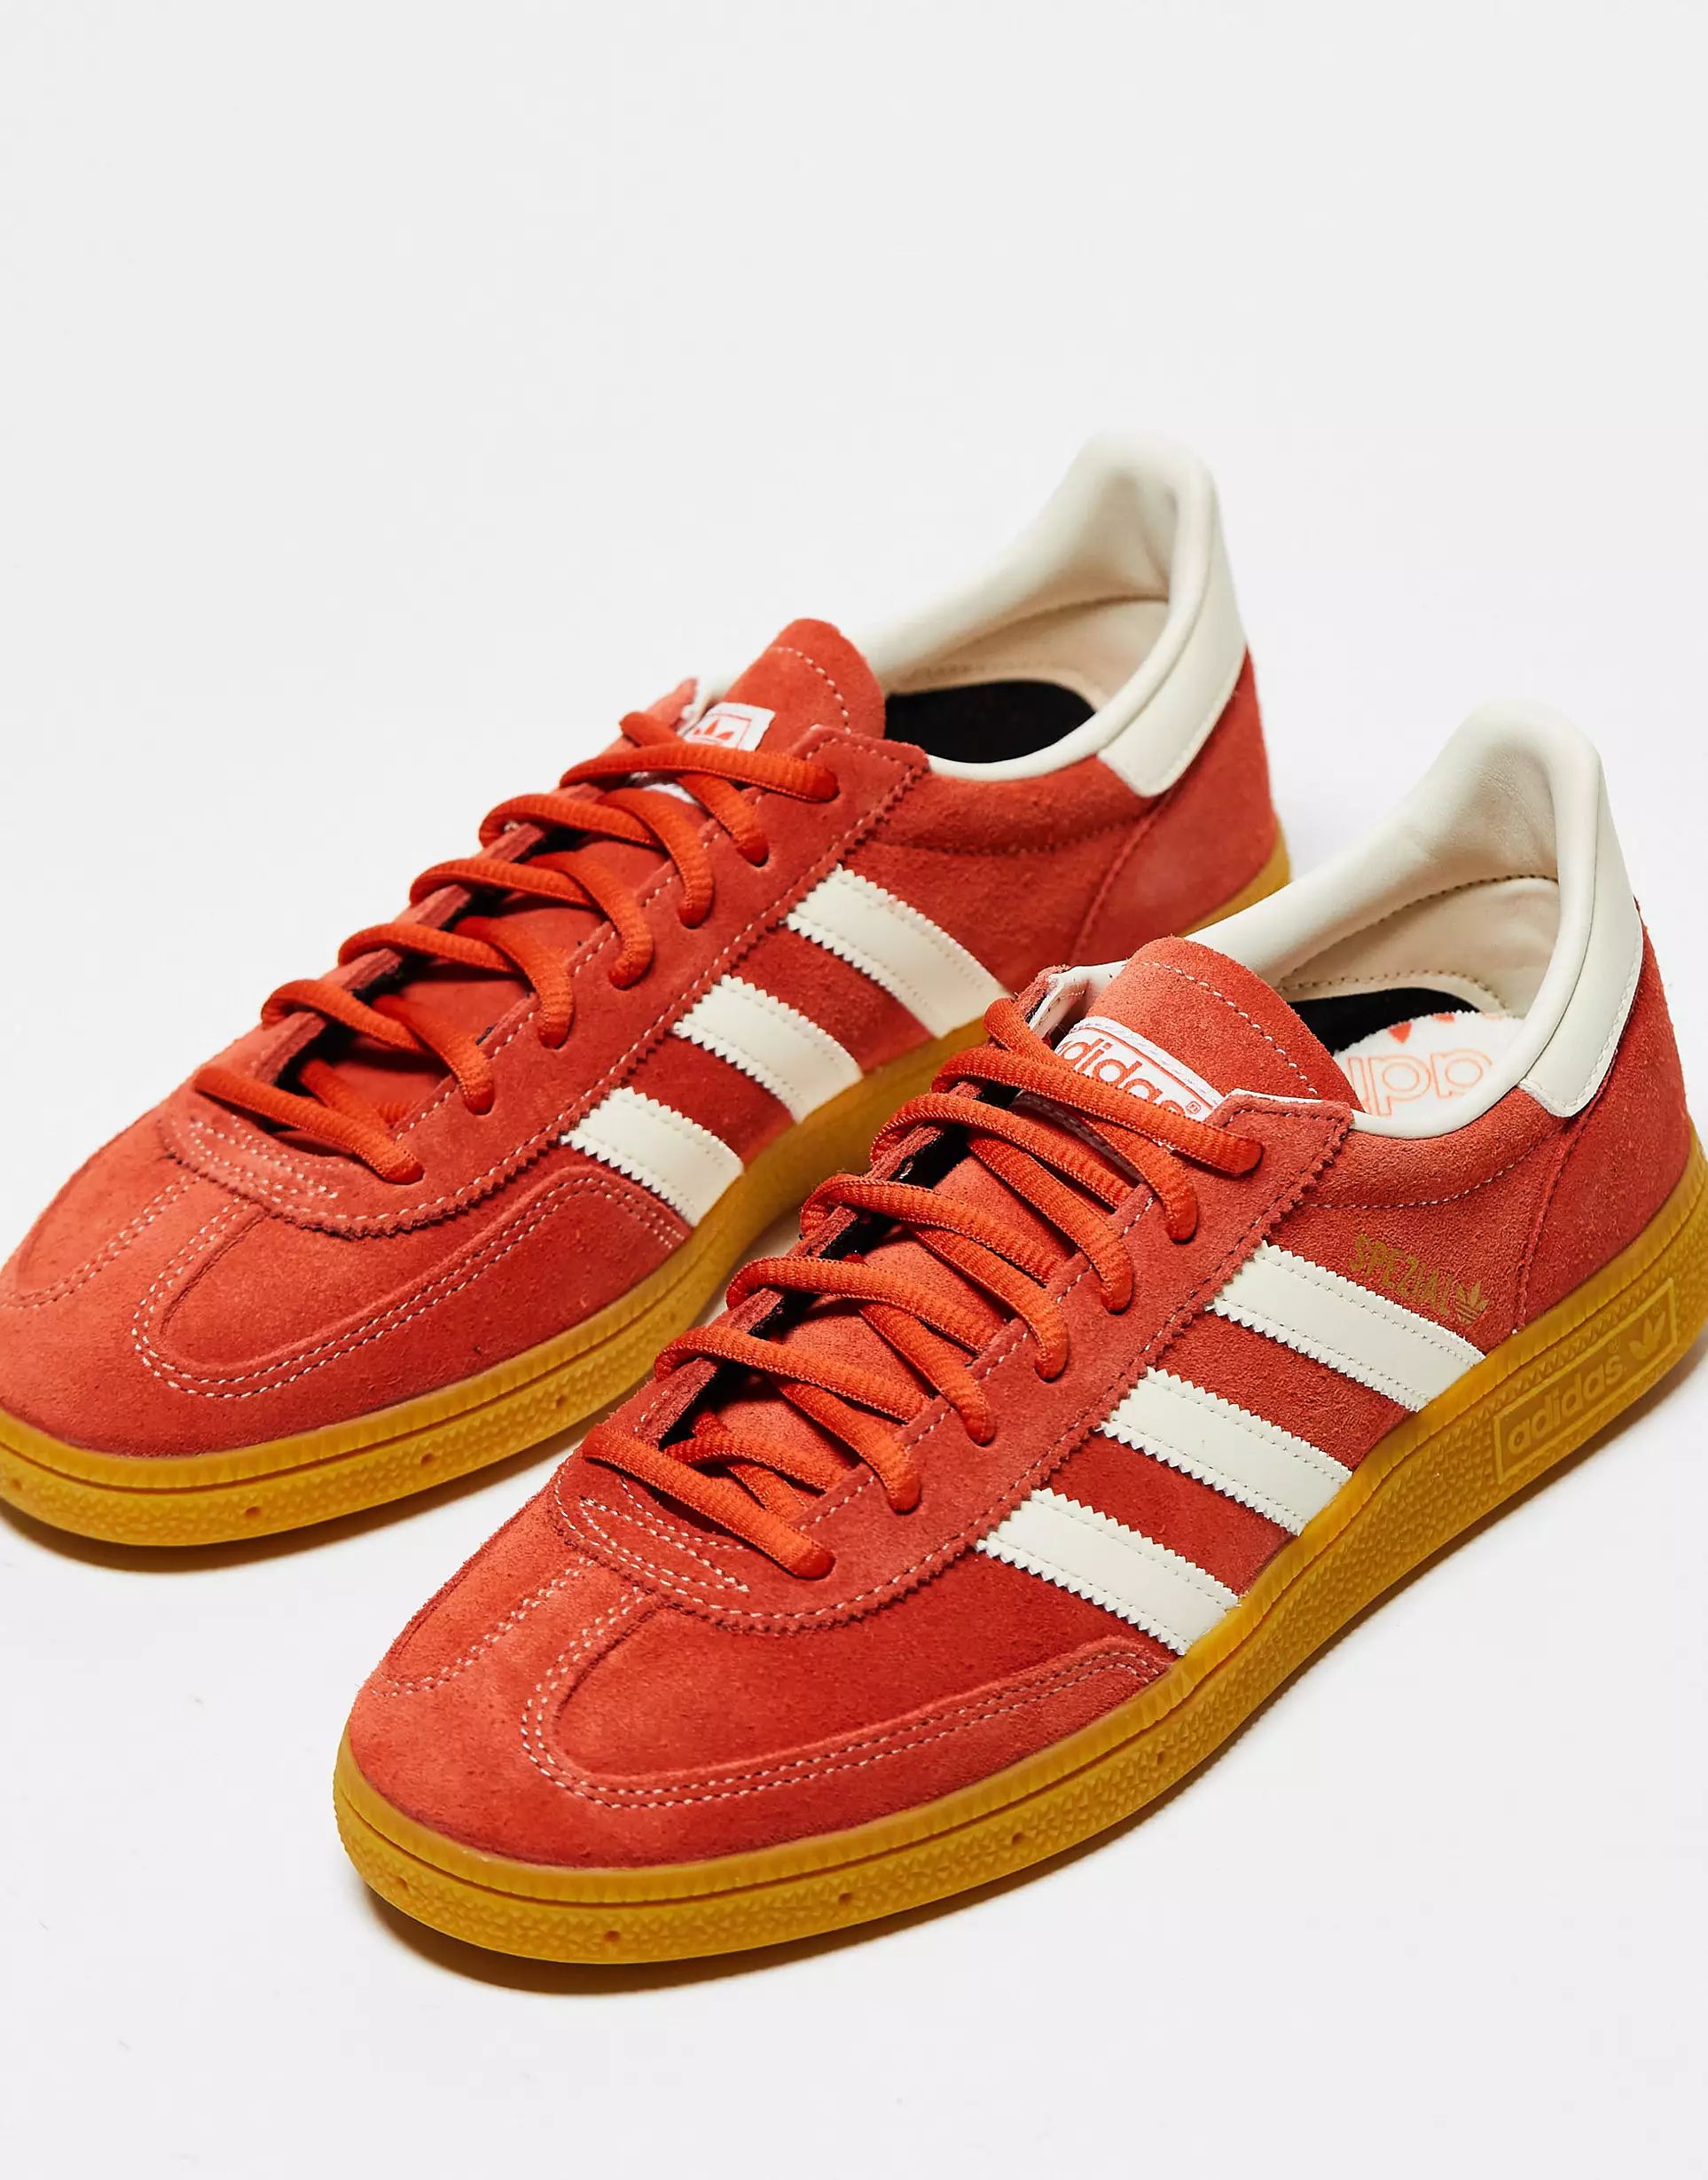 adidas Originals Handball Spezial gum sole trainers in red and white | ASOS (Global)